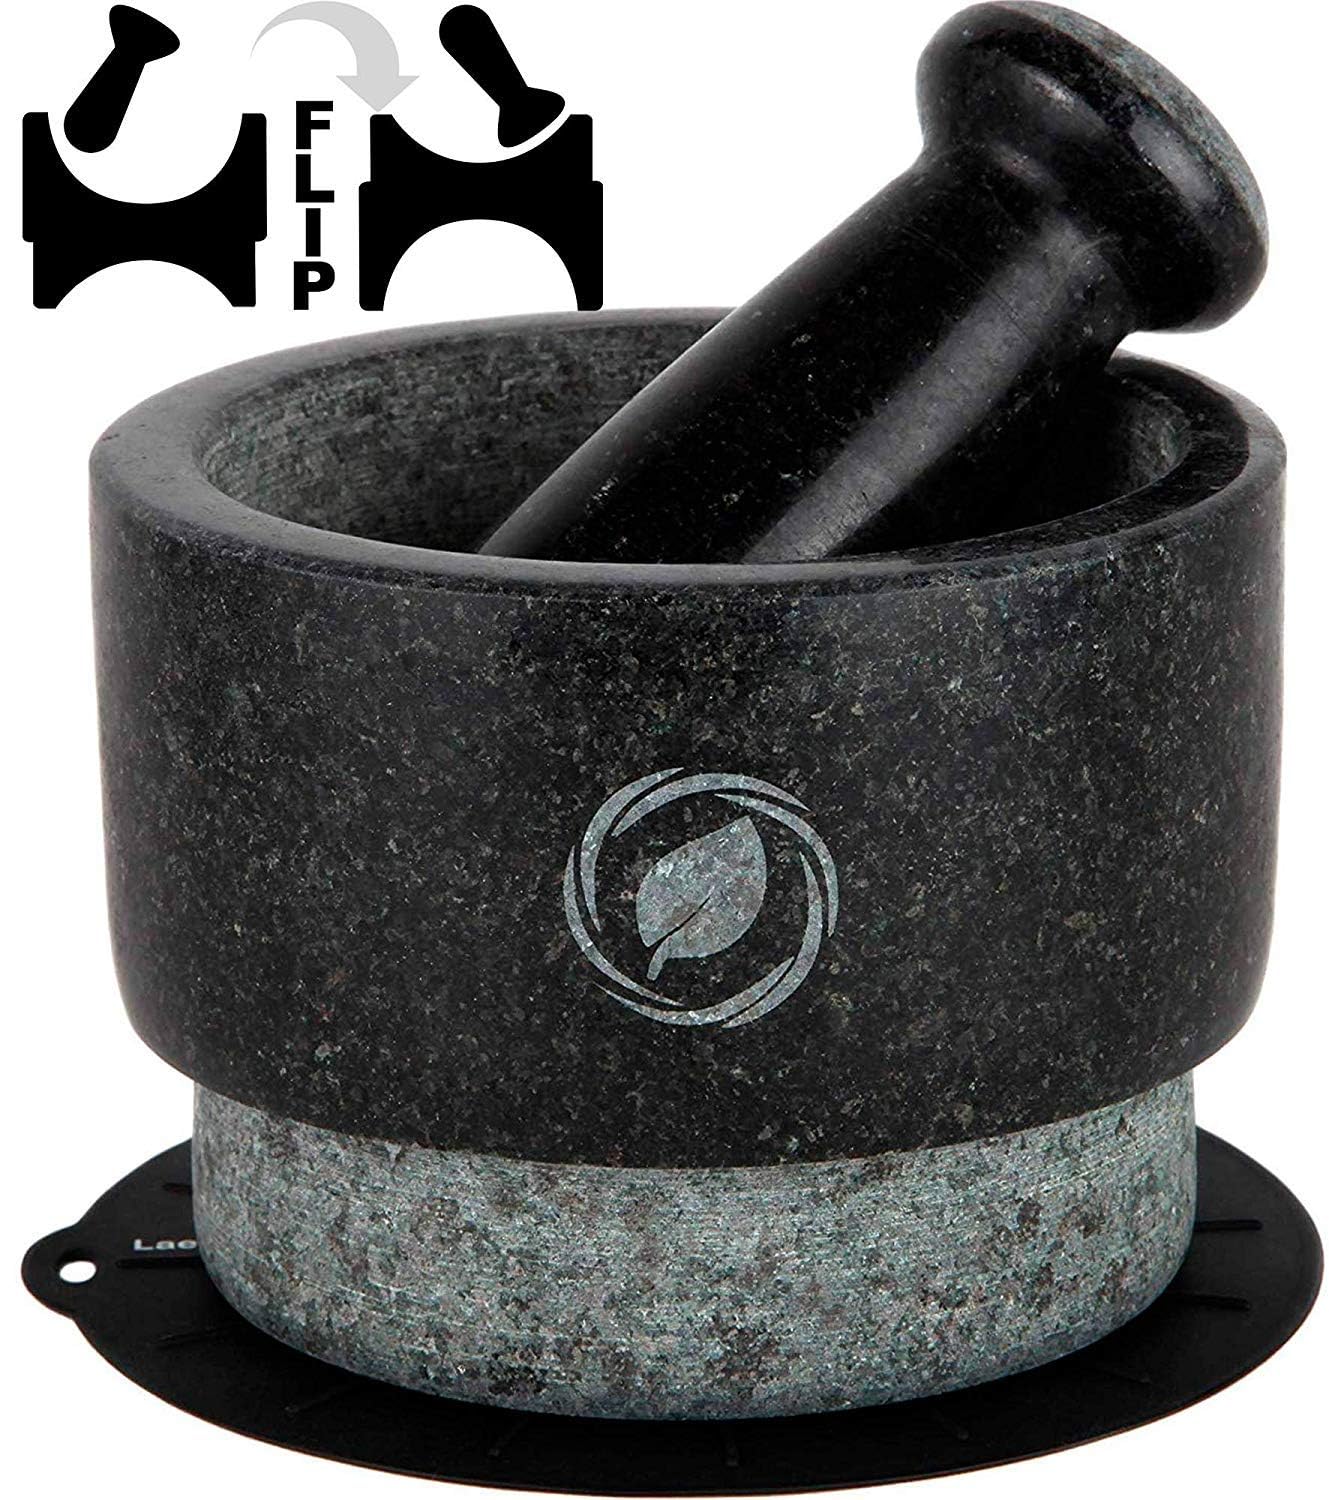 Laevo Mortar and Pestle Set (Large) | Stone Spice Grinder | 2.1 Cup Capacity | 5.5 inch | Reversible | Molcajete Mexicano | Guacamole, Pesto, Spices | Large Mortar & Pestles | Gift Set  - Like New